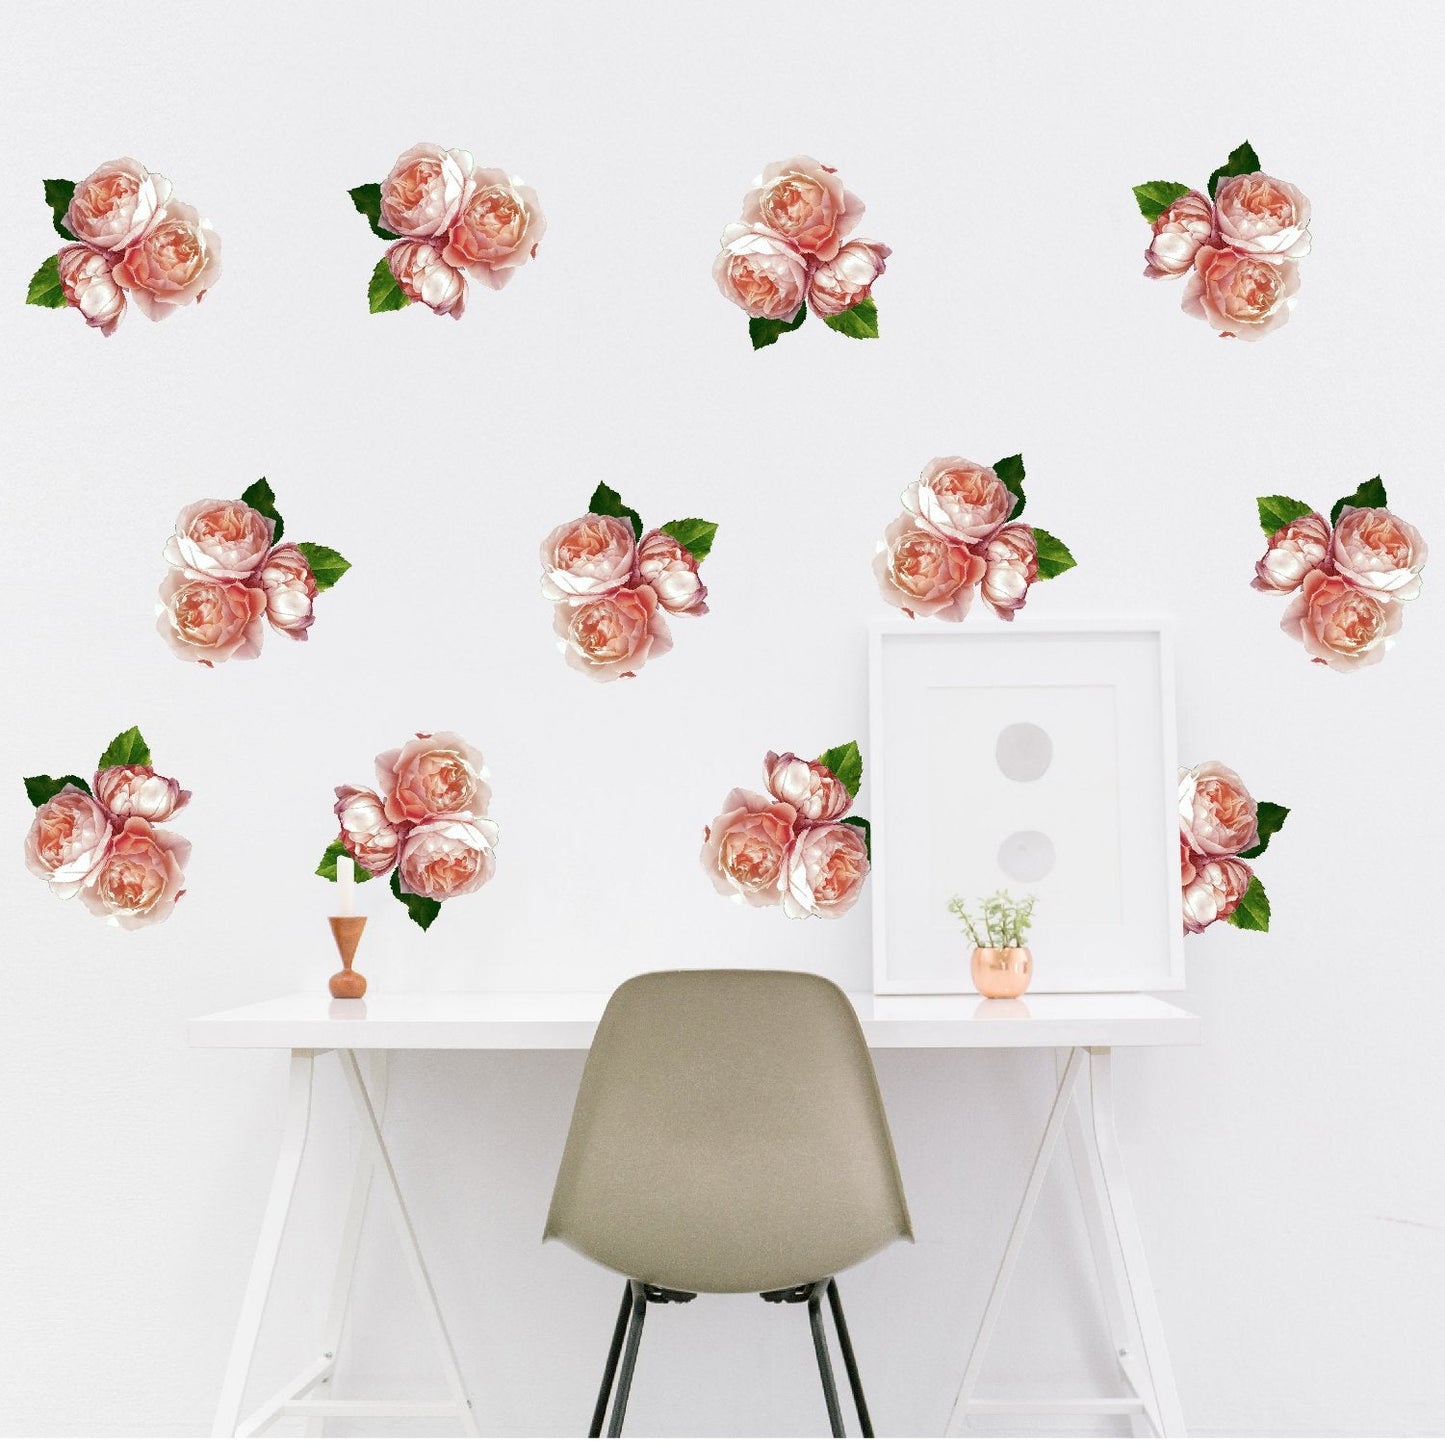 Rose Peonies Flower Clusters | Removable + Reusable Fabric Decals - Picture Perfect Decals